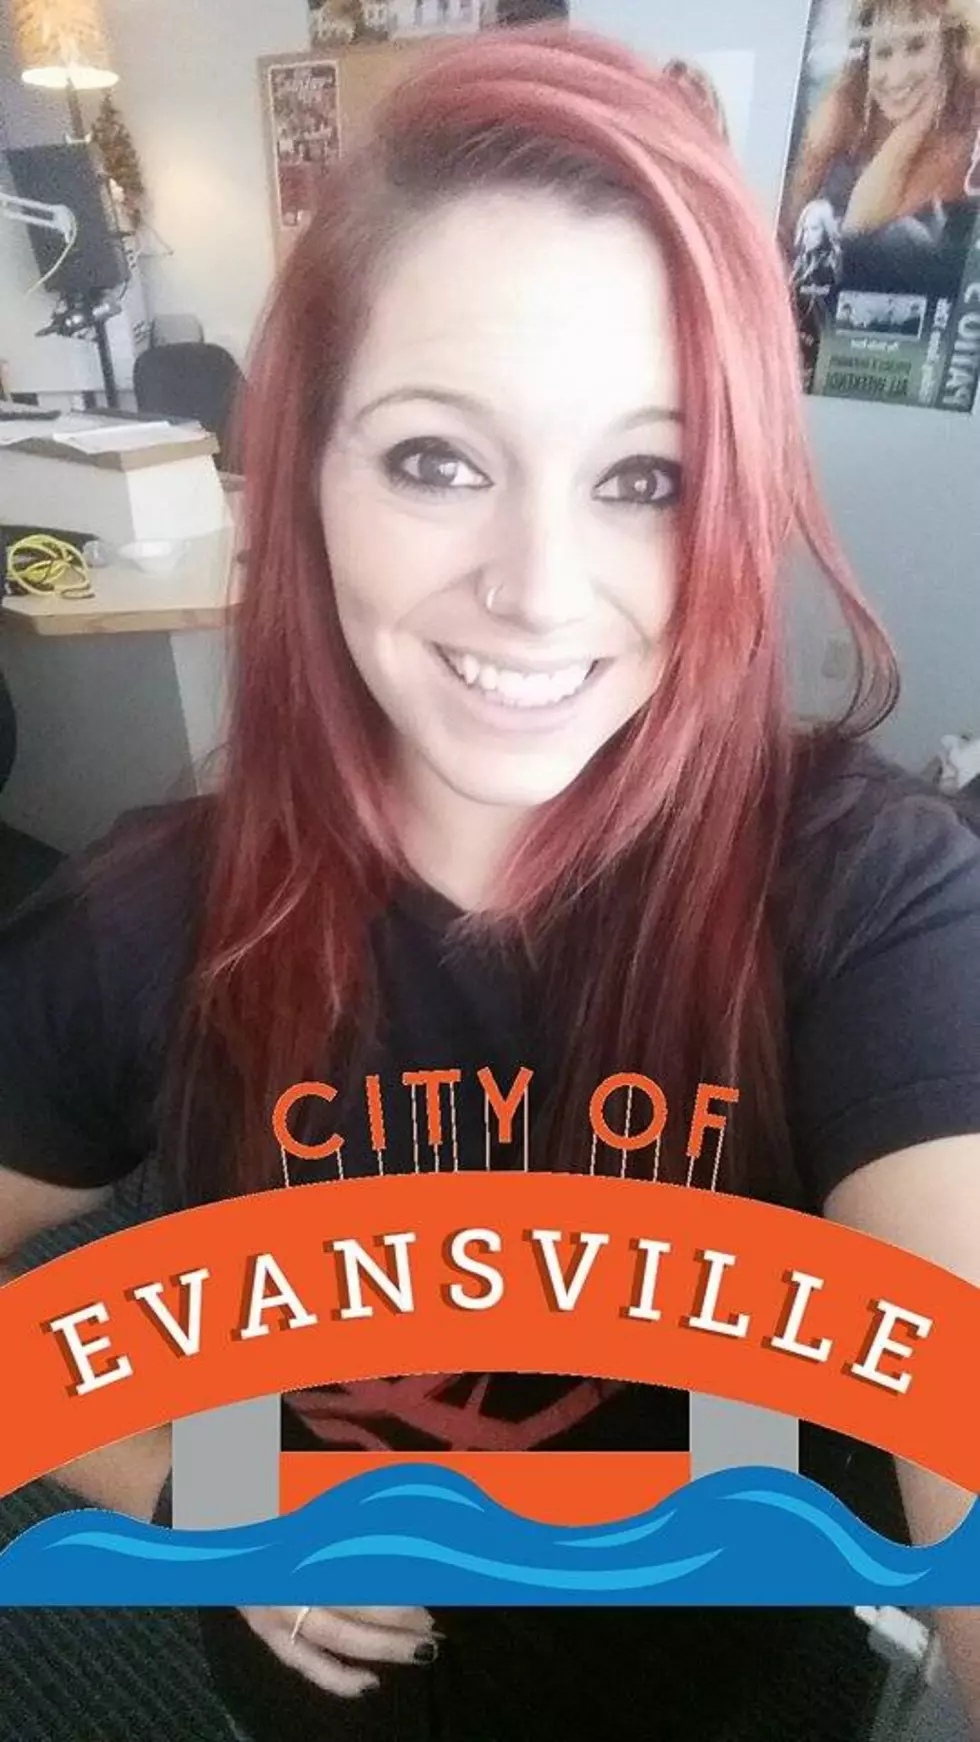 Evansville FINALLY Has a Snapchat Filter!